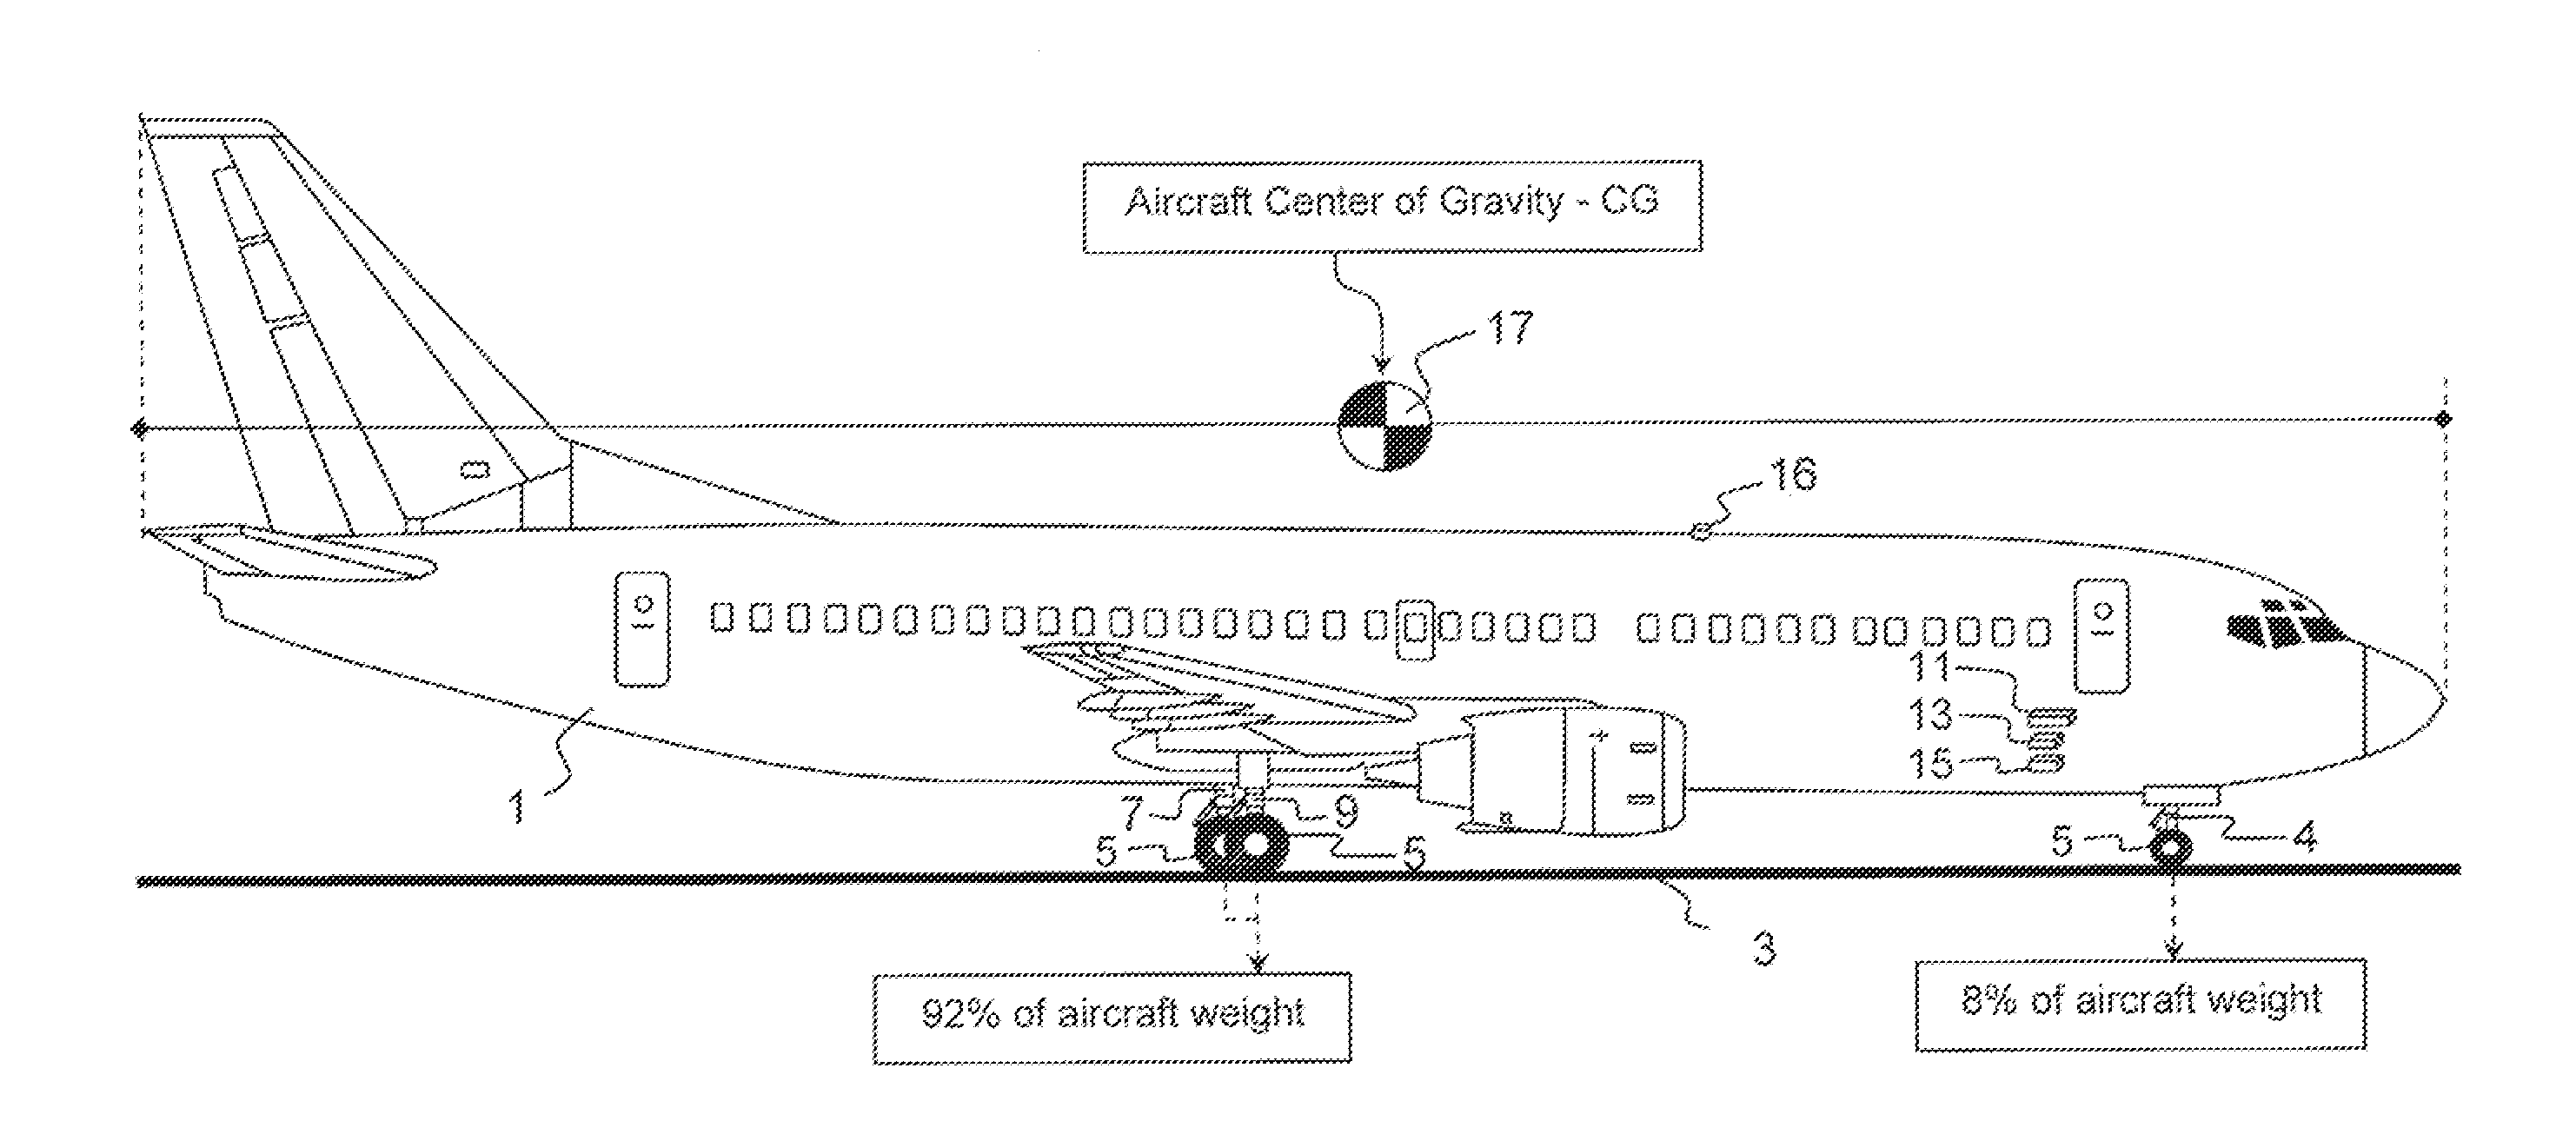 Method for determining aircraft center of gravity independent of measuring aircraft total weight